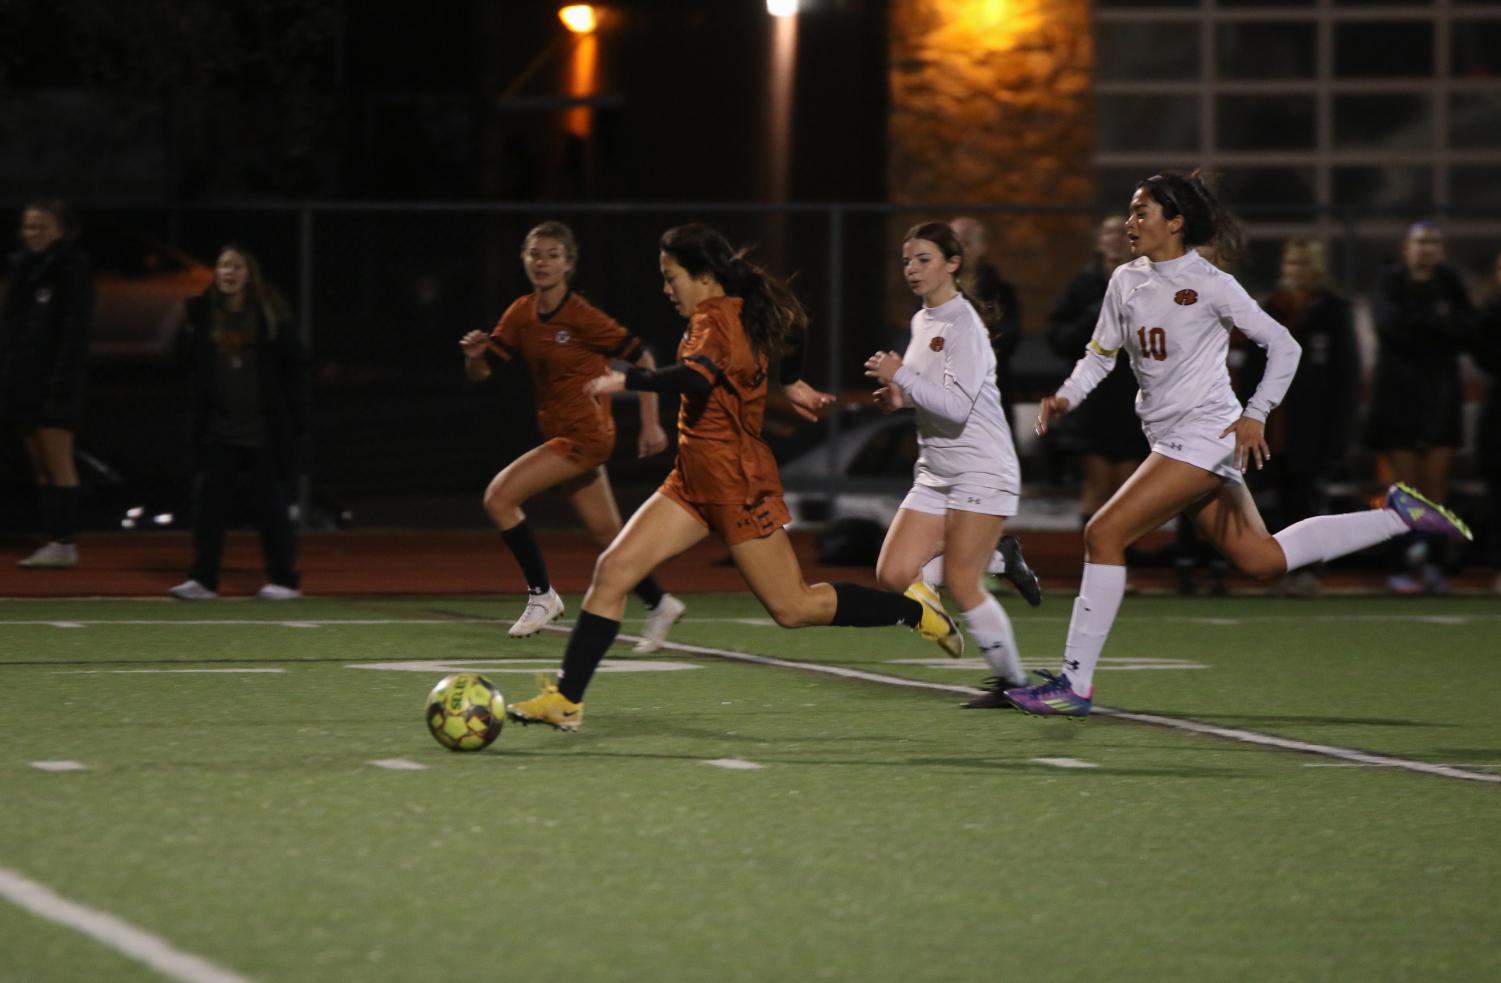 Varsity+Girls+Soccer+Secures+Win+Over+Hutto+Hippos%2C+8-0